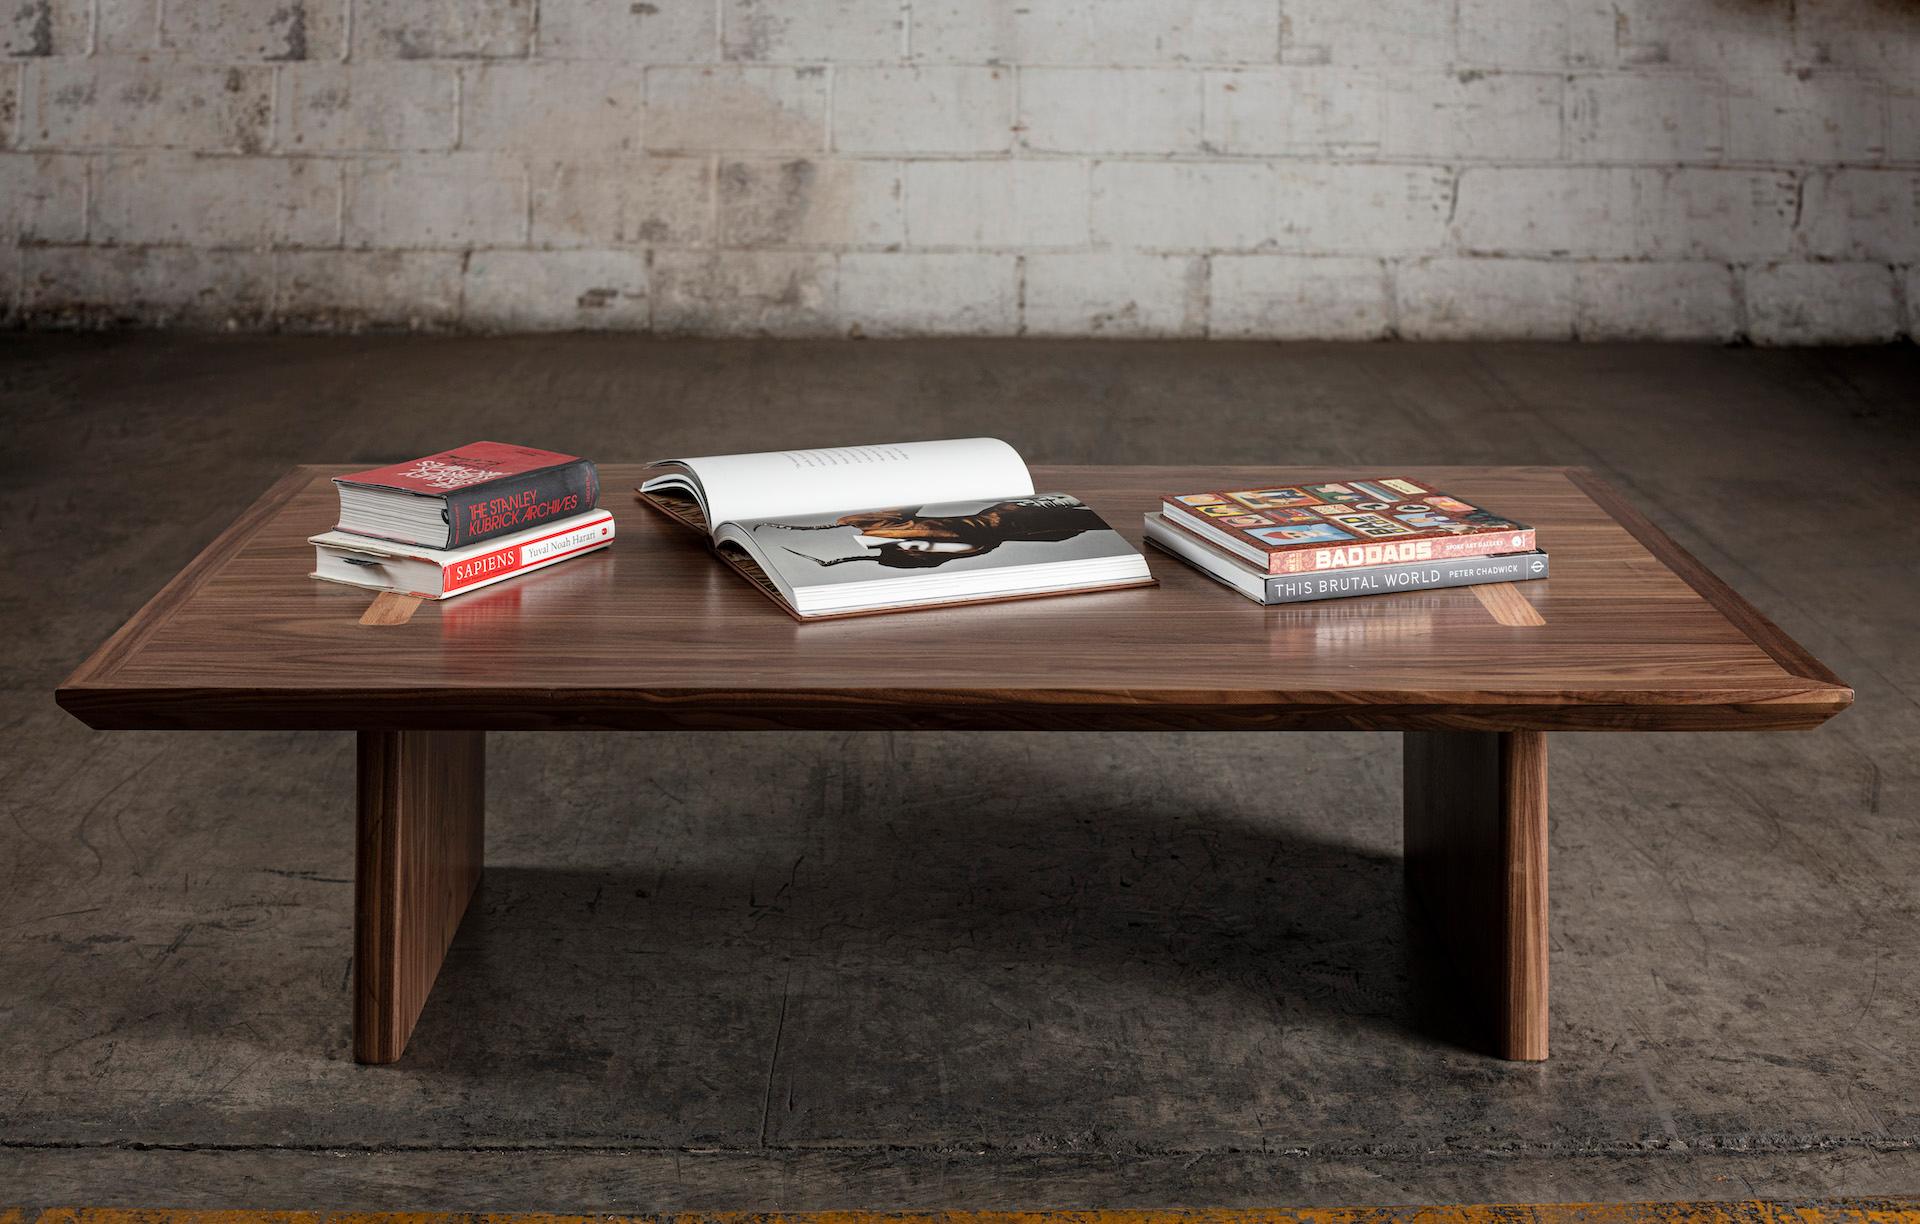 This modern, minimalist and aesthetic coffee table. Masterfully handcrafted of beautiful black walnut, it is a study in simplicity and finely tuned proportions.